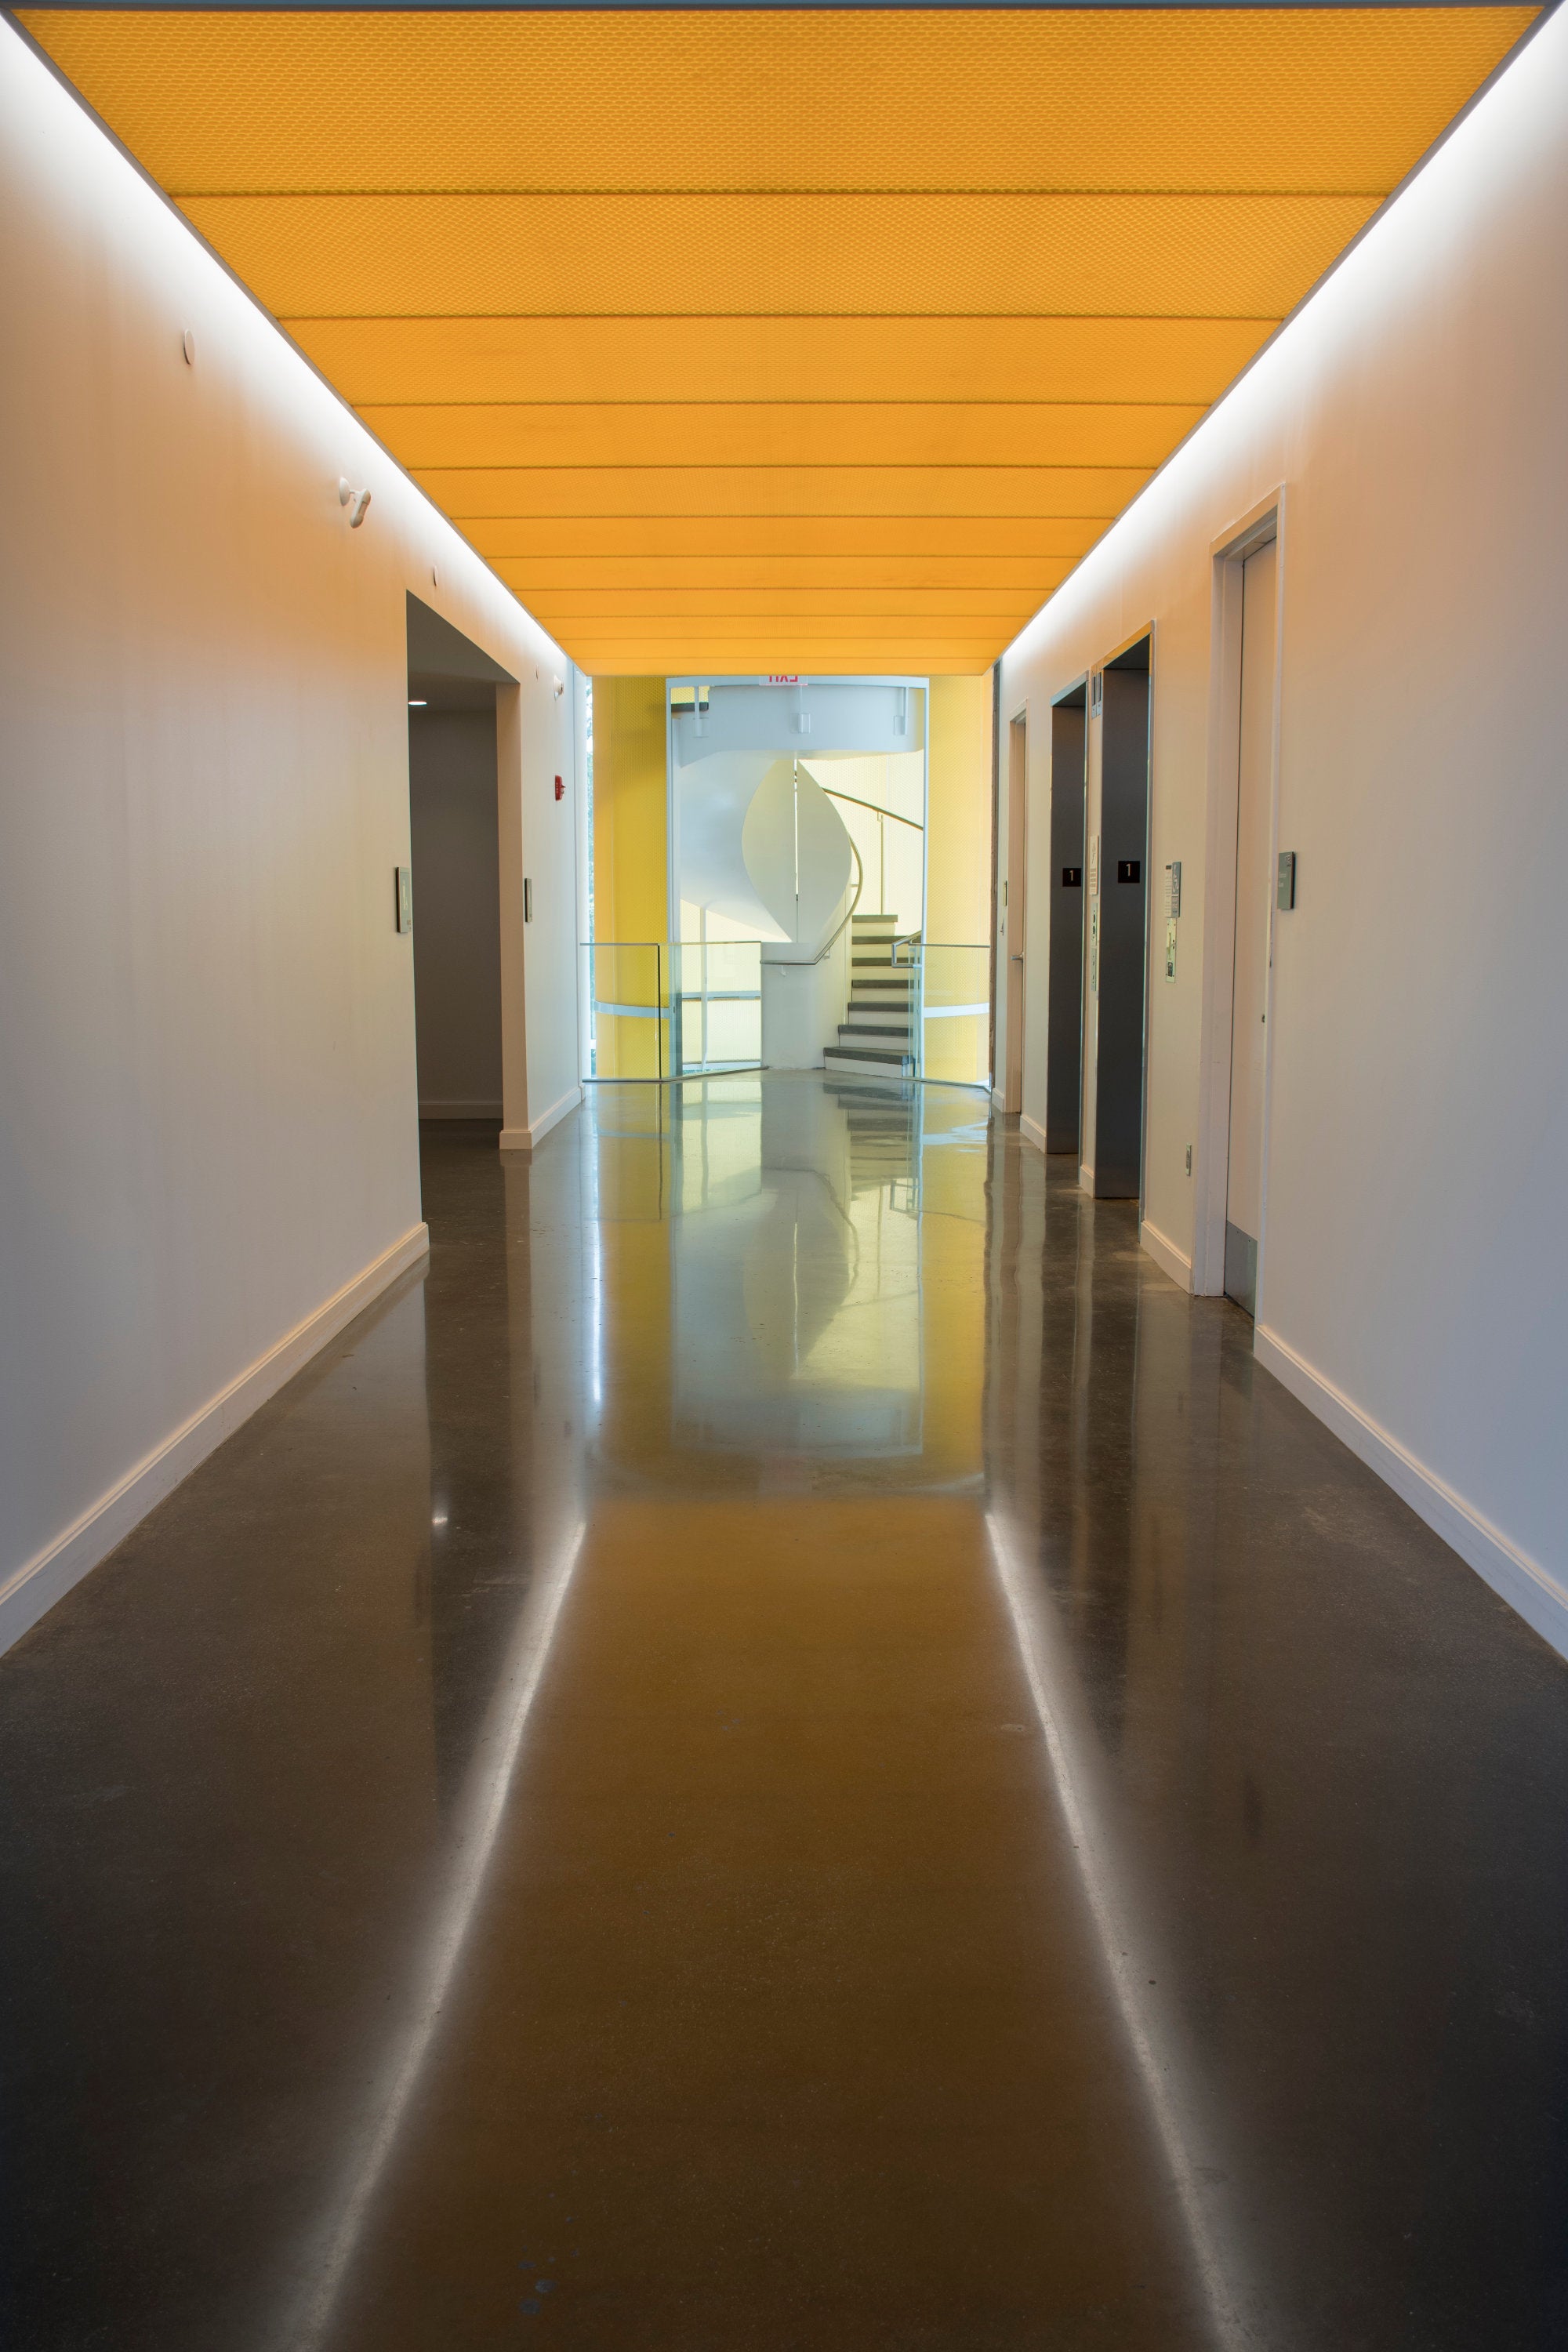 A view of an interior hallway in the Fascitelli Center for Advanced Engineering